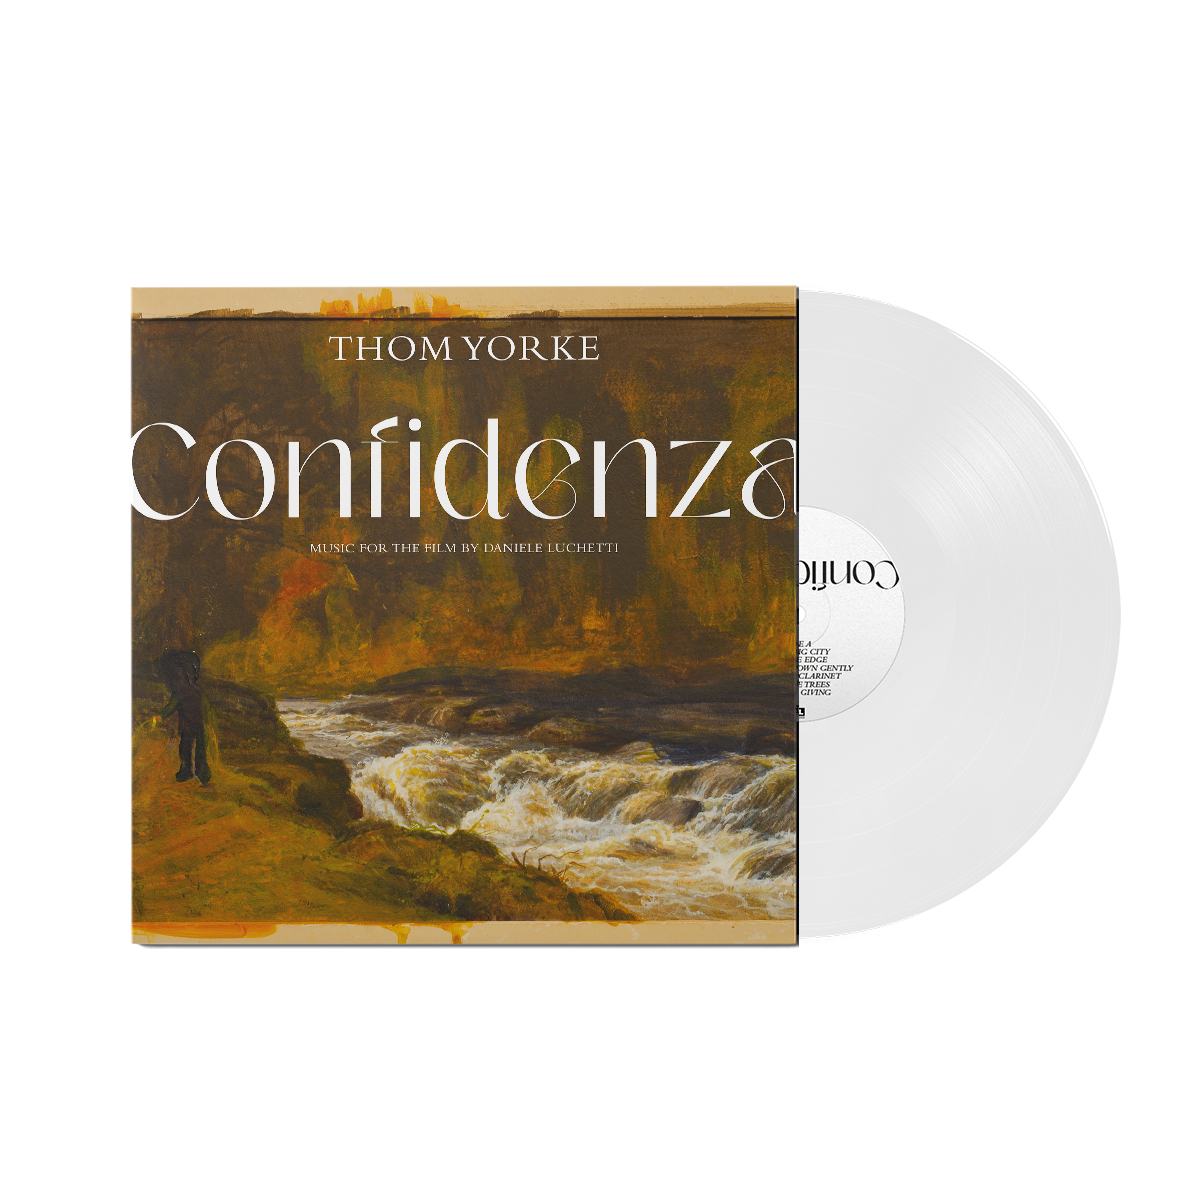 The soundtrack for Confidenza is now available on streaming services, with vinyl and CD to follow on 12 July. Listen / pre-order thomyorke.x-l.co/confidenza-ost.